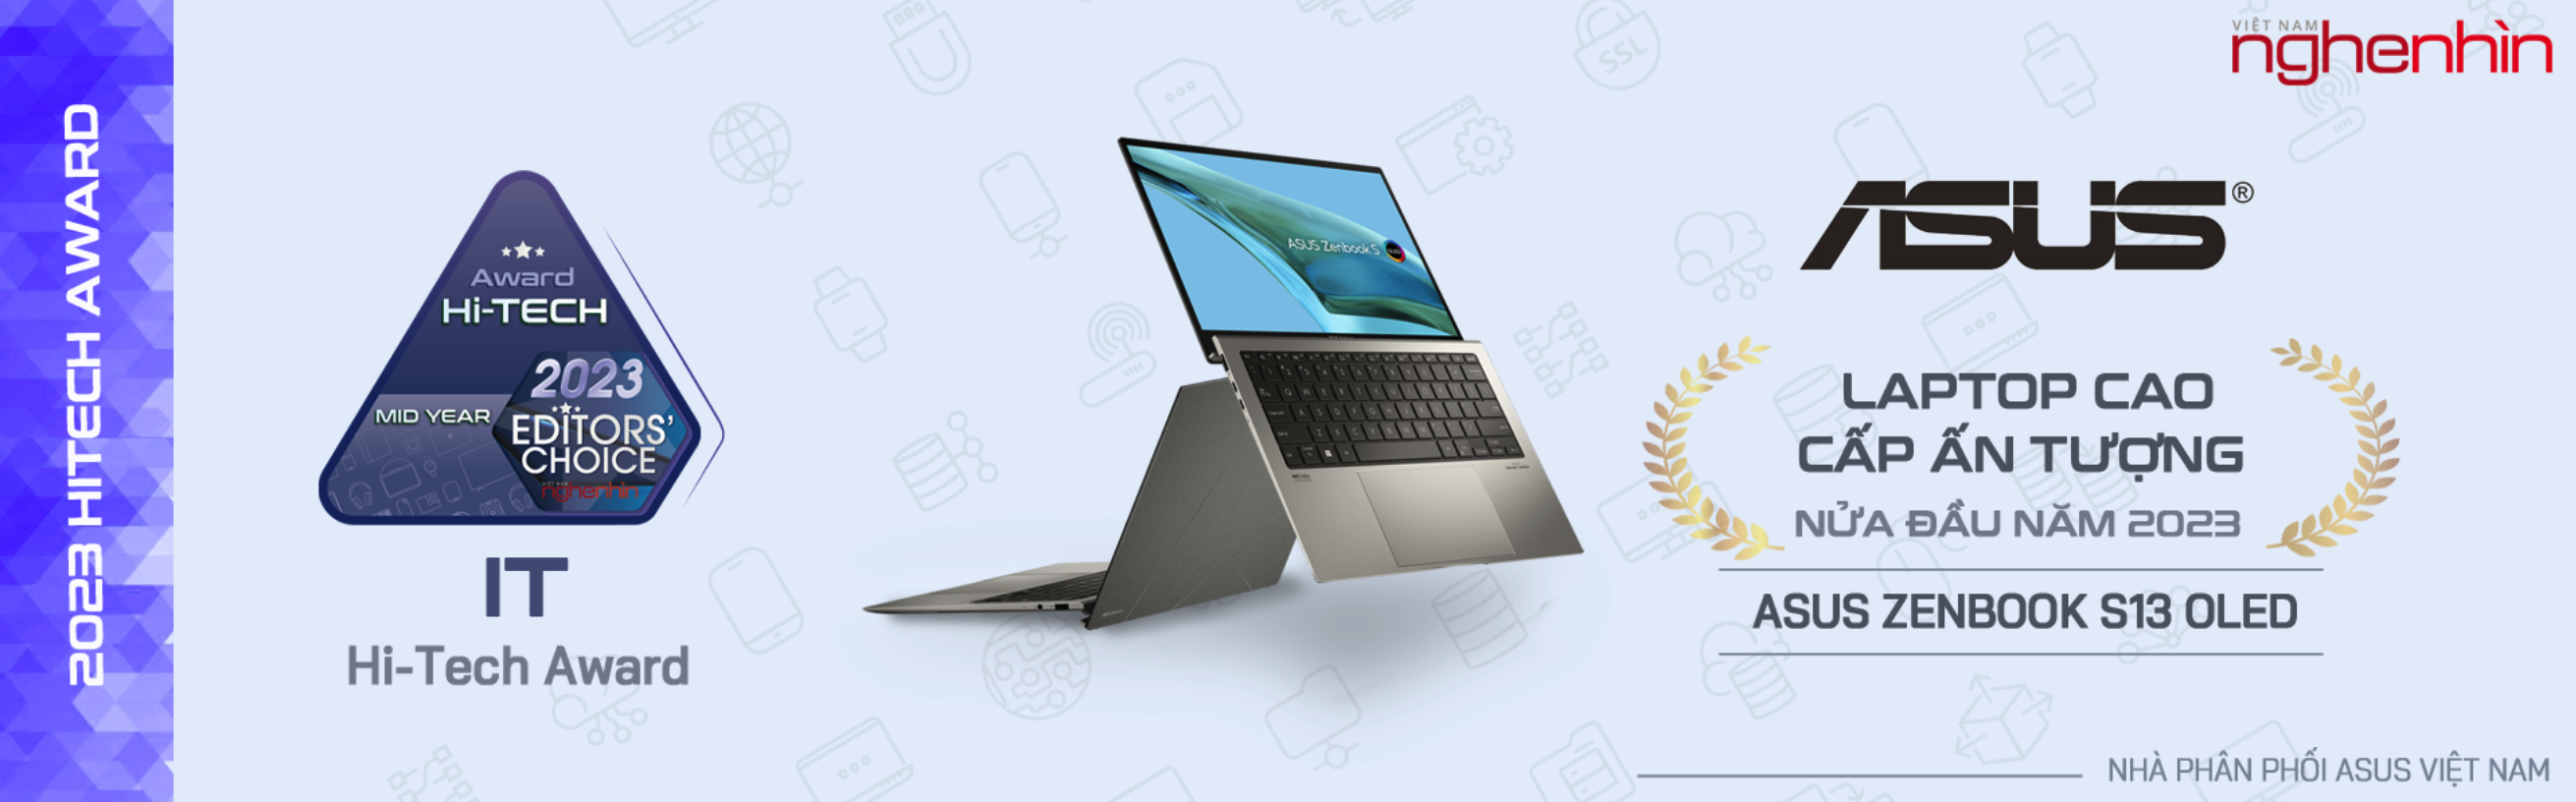 nghe_nhin_hitech_awards_mid_year_2023_asus_zenbook_s13_oled.png (1.04 MB)